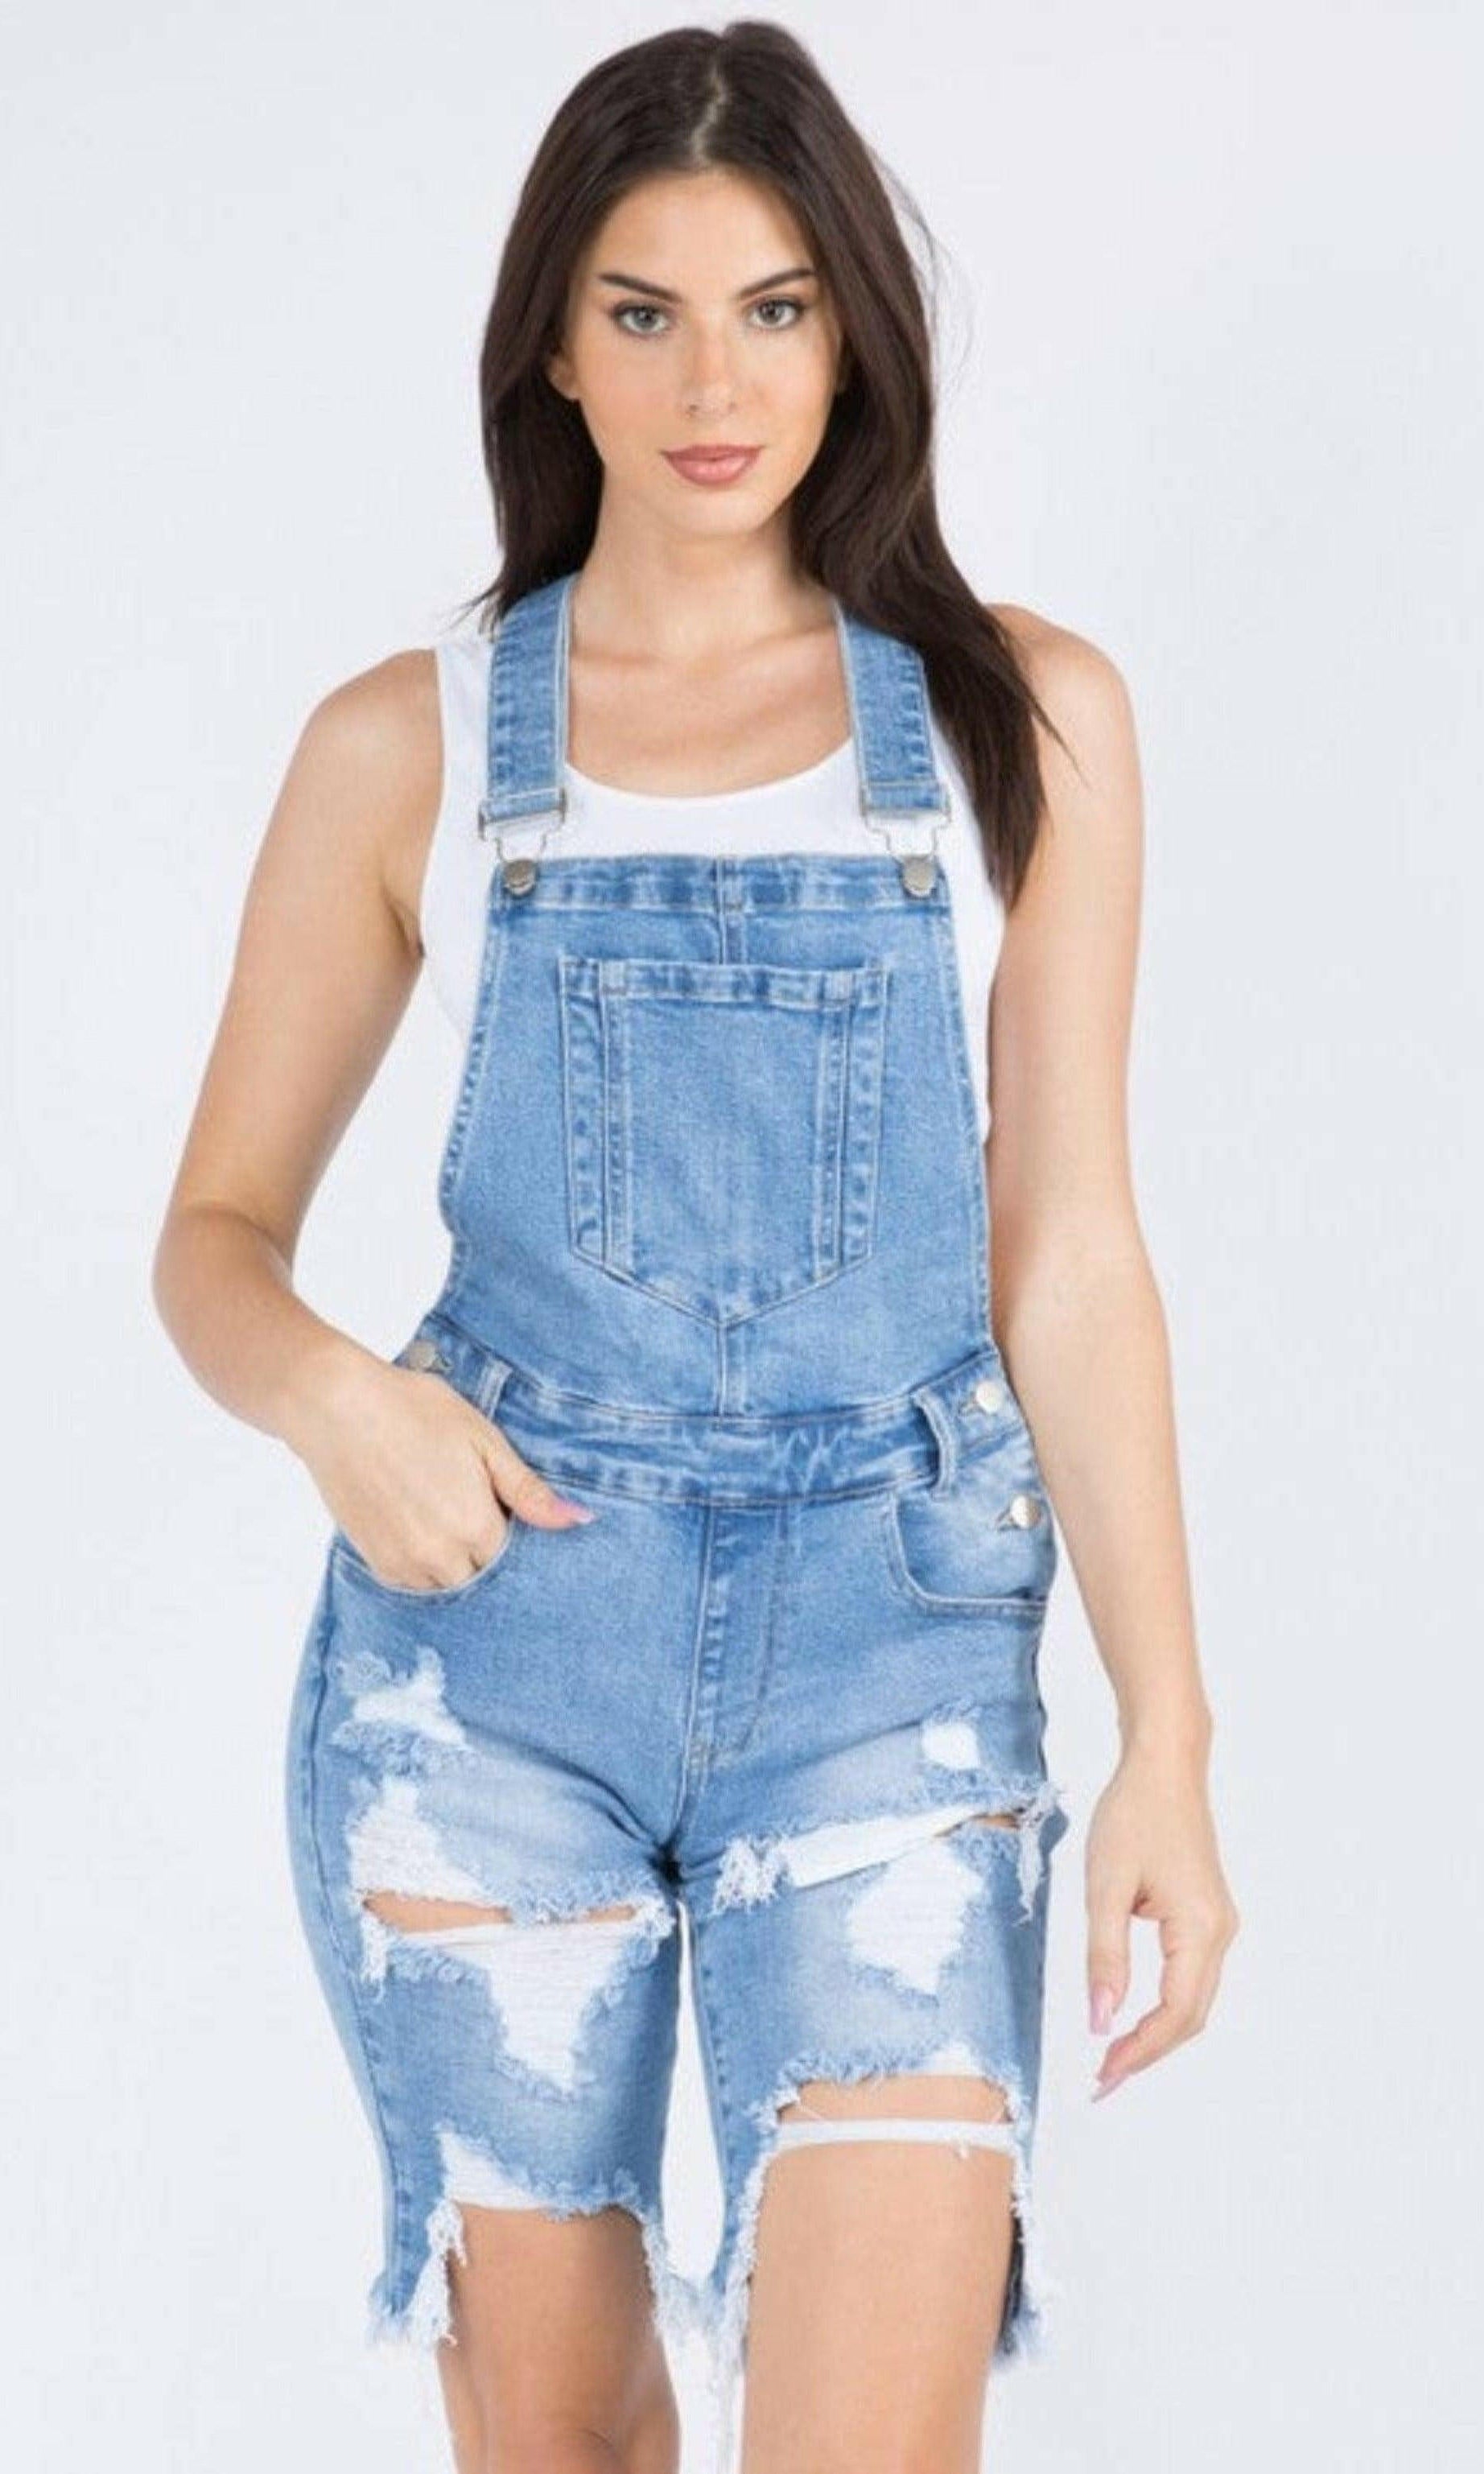 Epicplacess jumpsuits SMALL / BLUE / united states SOLID MID RISE SLIM FIT SHORT OVERALLS JUMPSUITS